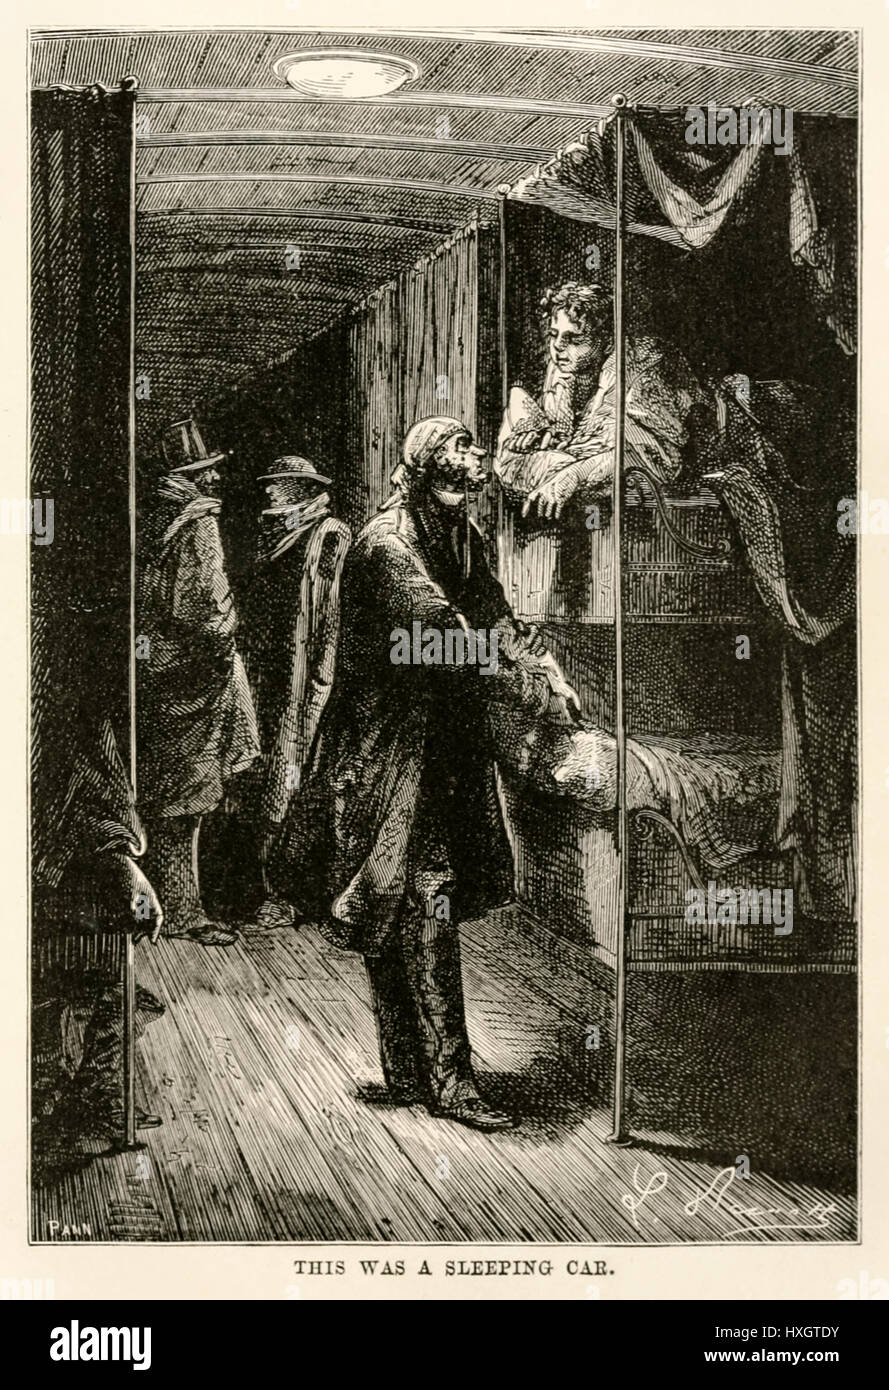 “This was a sleeping car.” from ‘Around the World in Eighty Days’ by Jules Verne (1828-1905) published in 1873 illustration by Léon Benett (1839-1917) and engraving by Adolphe François Pannemaker (1822-1900). Stock Photo